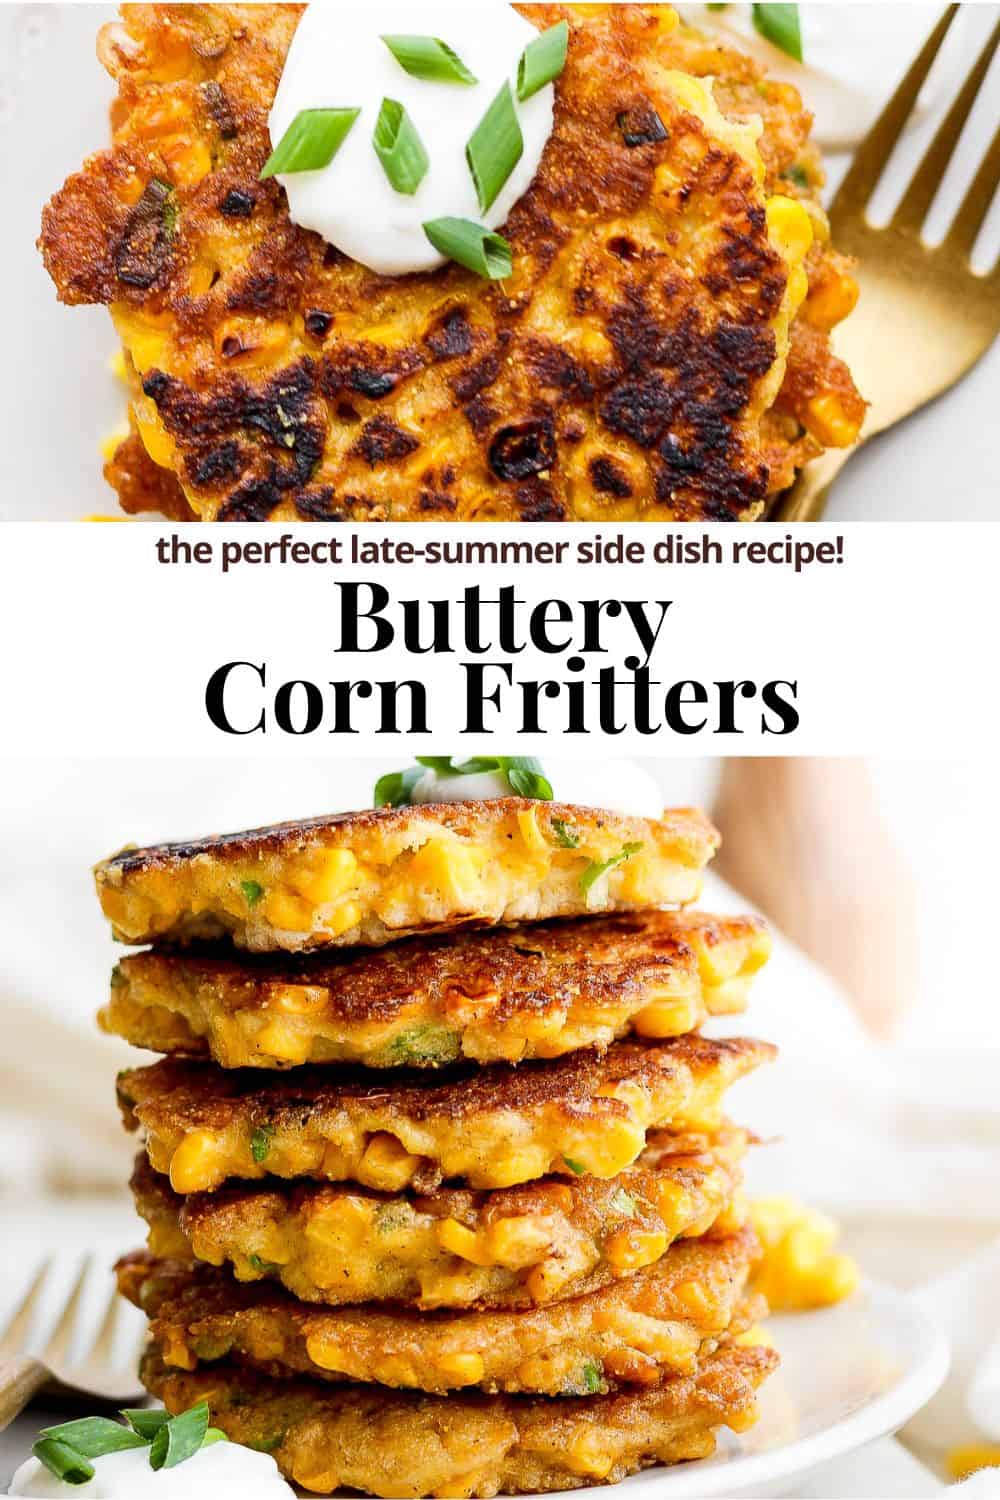 Pinterest image showing corn fritters with the title, "the perfect late-summer side dish recipe. Butter corn fitters."